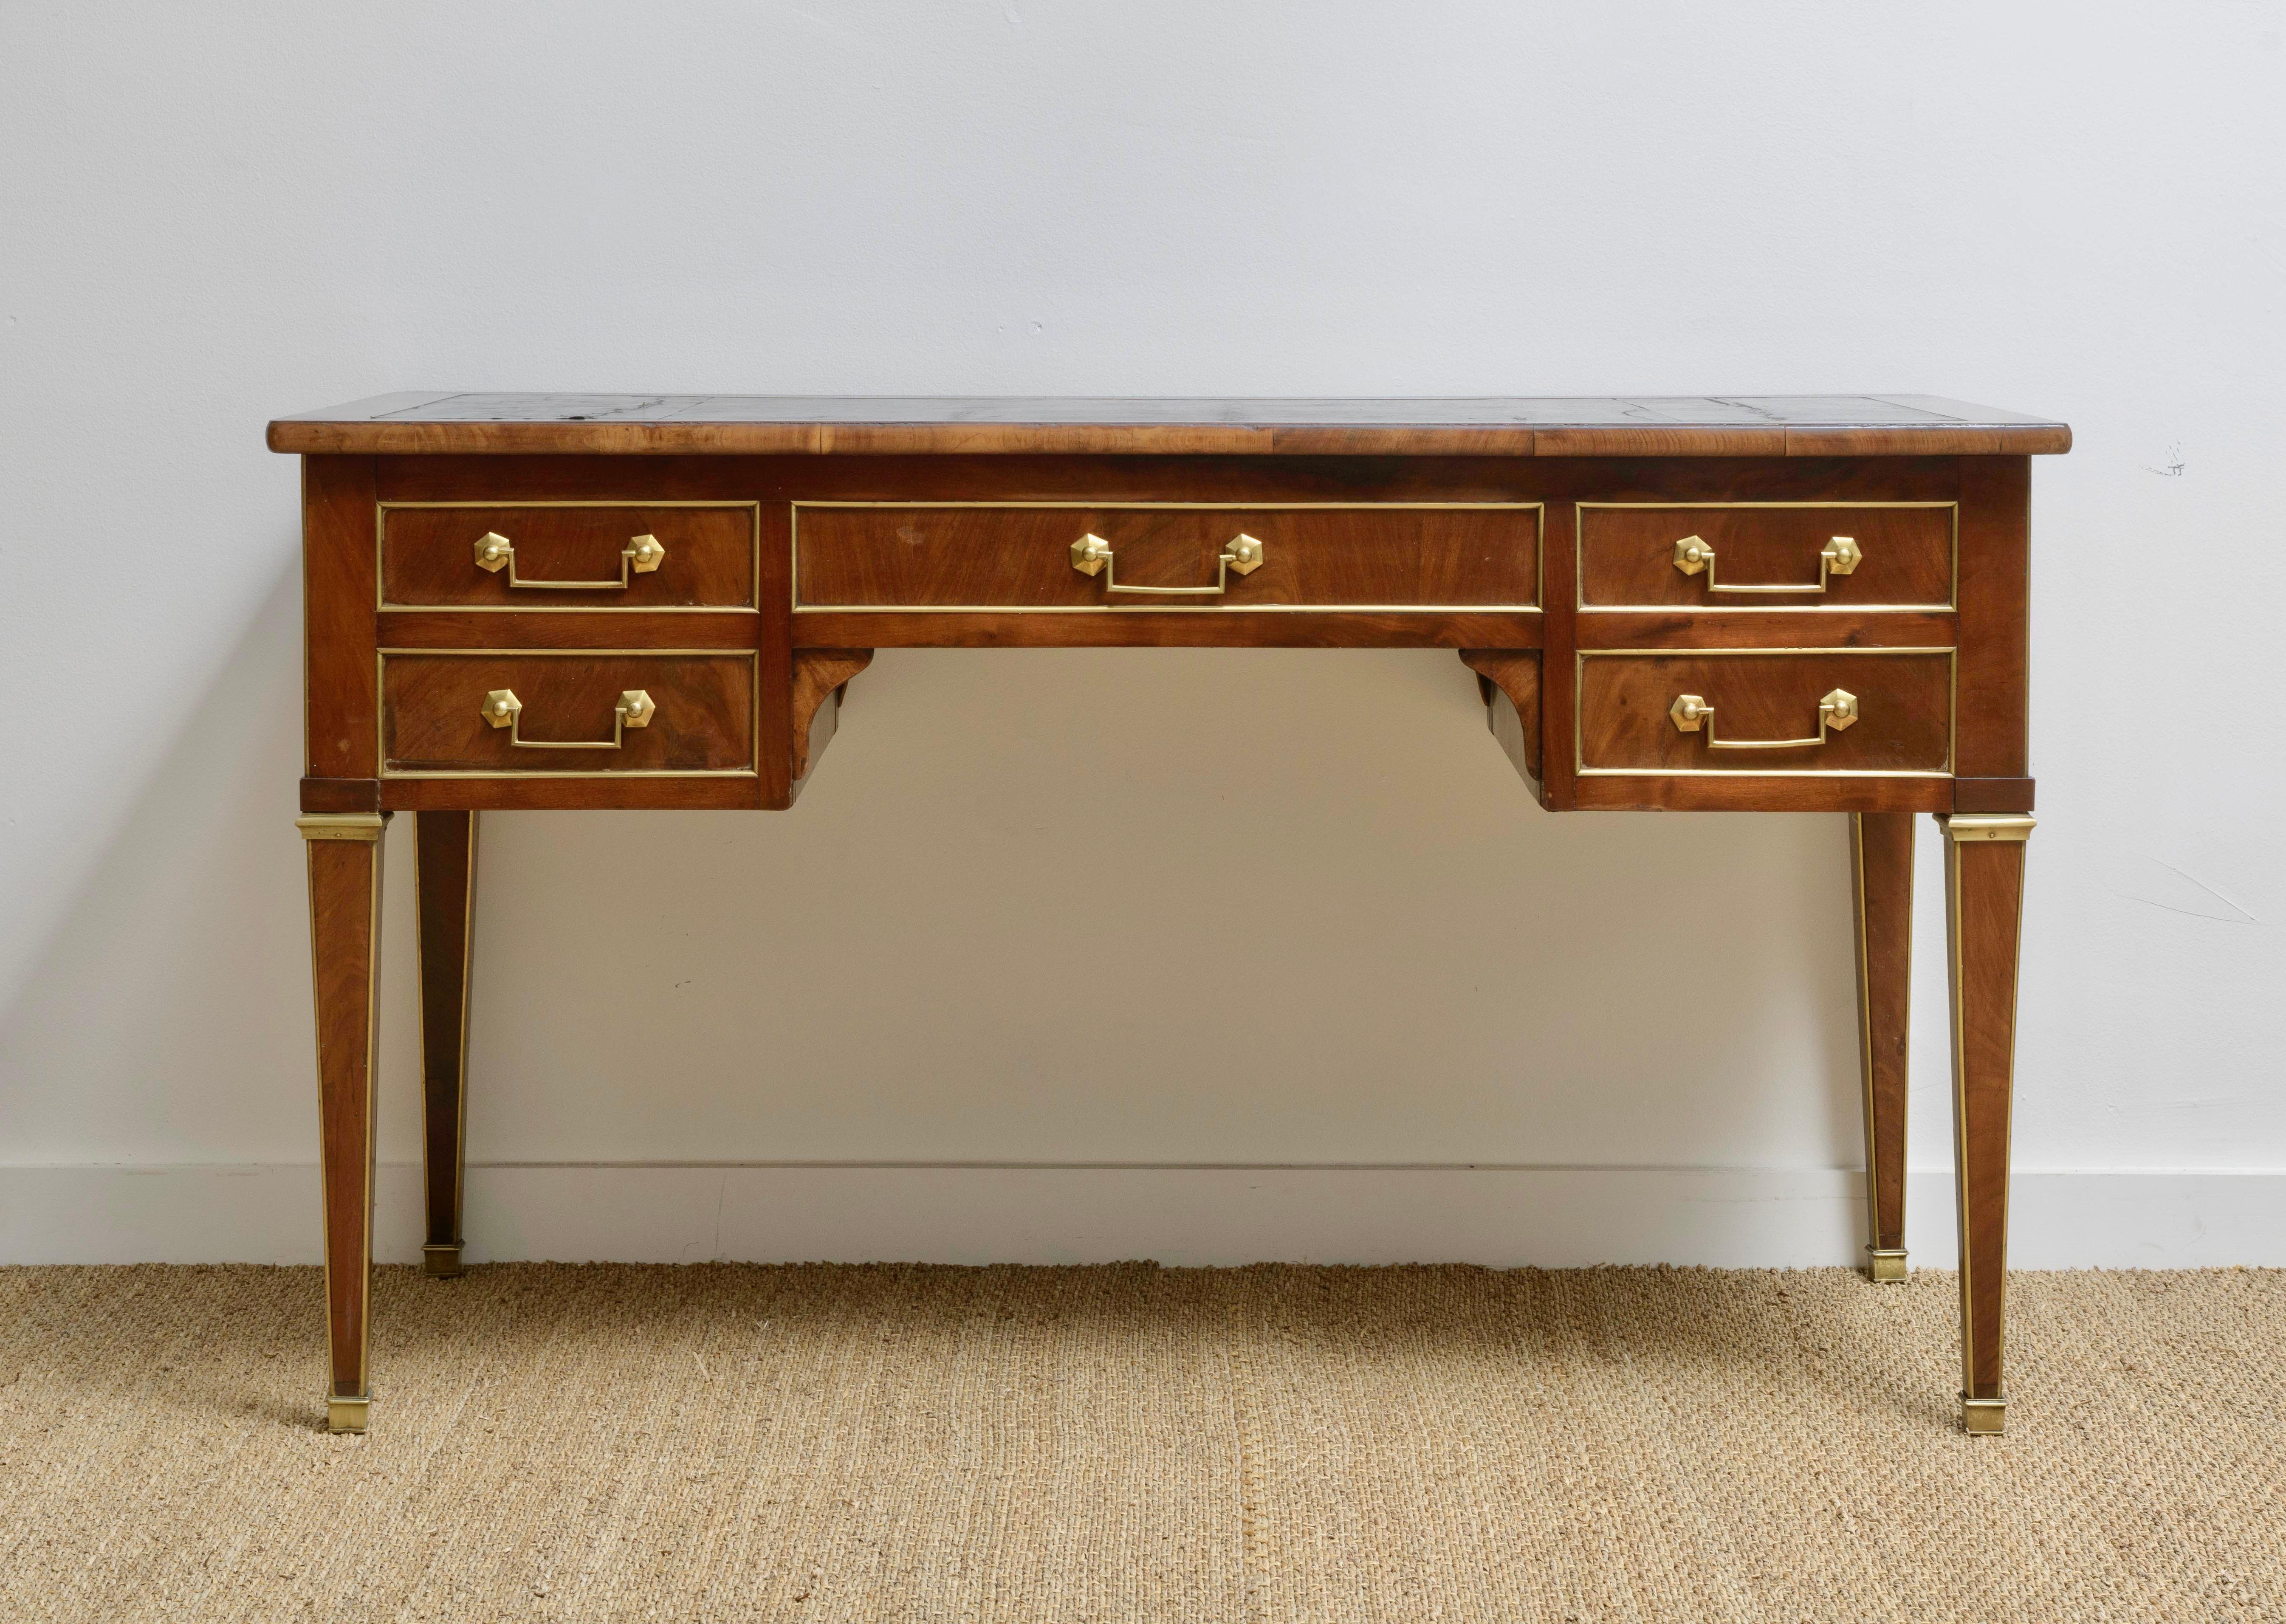 Beautifully scaled mahogany and mahogany veneer bureau plat from the Louis XVI period Double-sided decoration, with lateral pulls., resting on elegant tapered legs, with brass beading and feet (original) Decoration of fine brass fillets and a brass